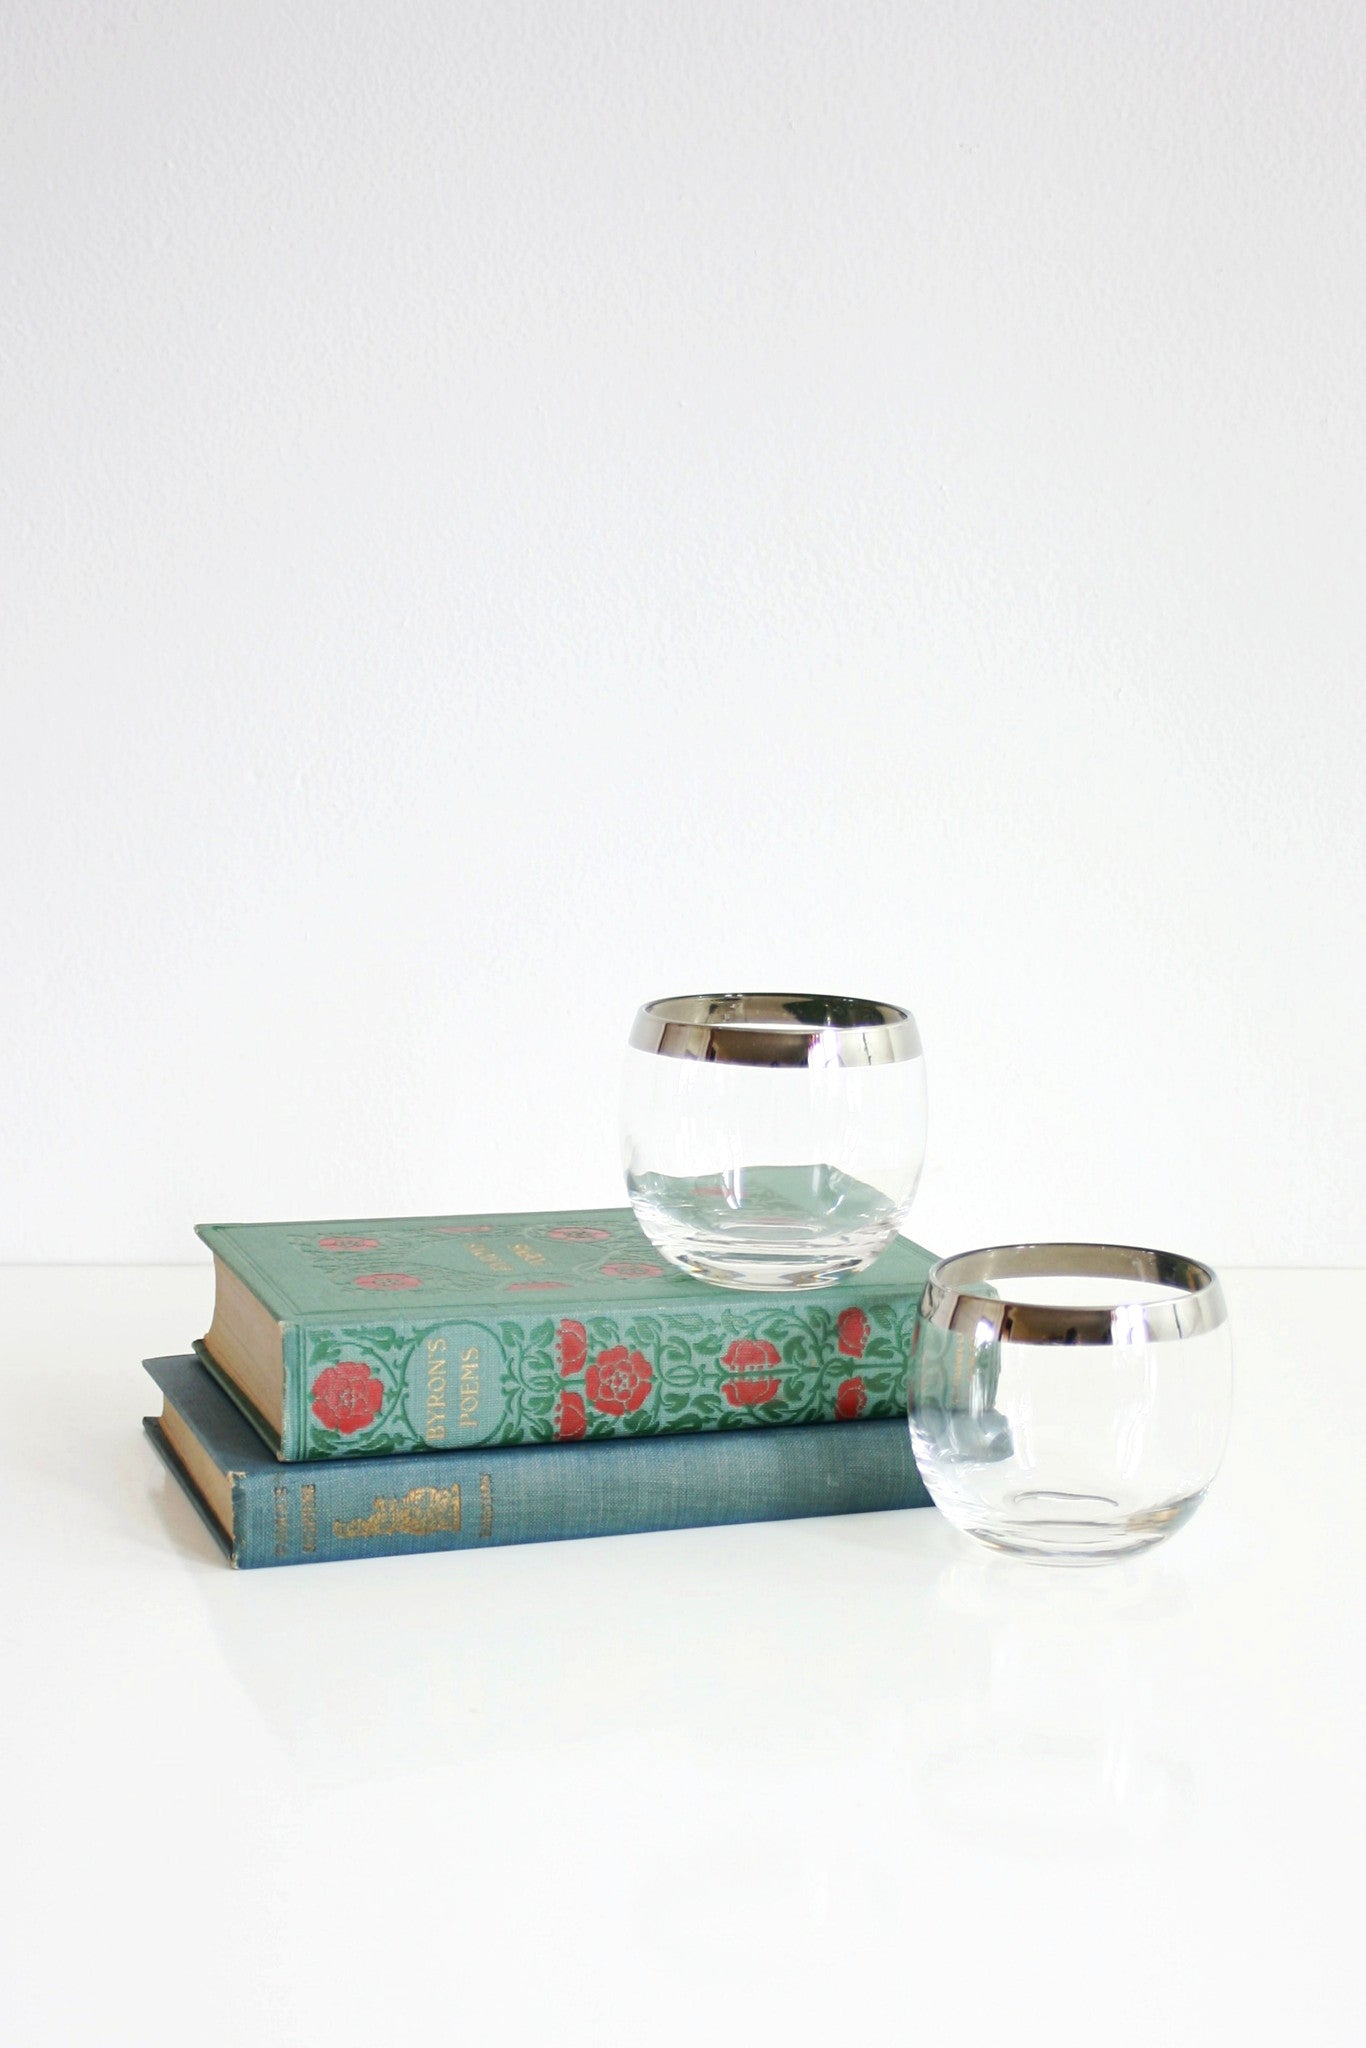 SOLD - Mid Century Pair of Dorothy Thorpe Roly Poly Glasses